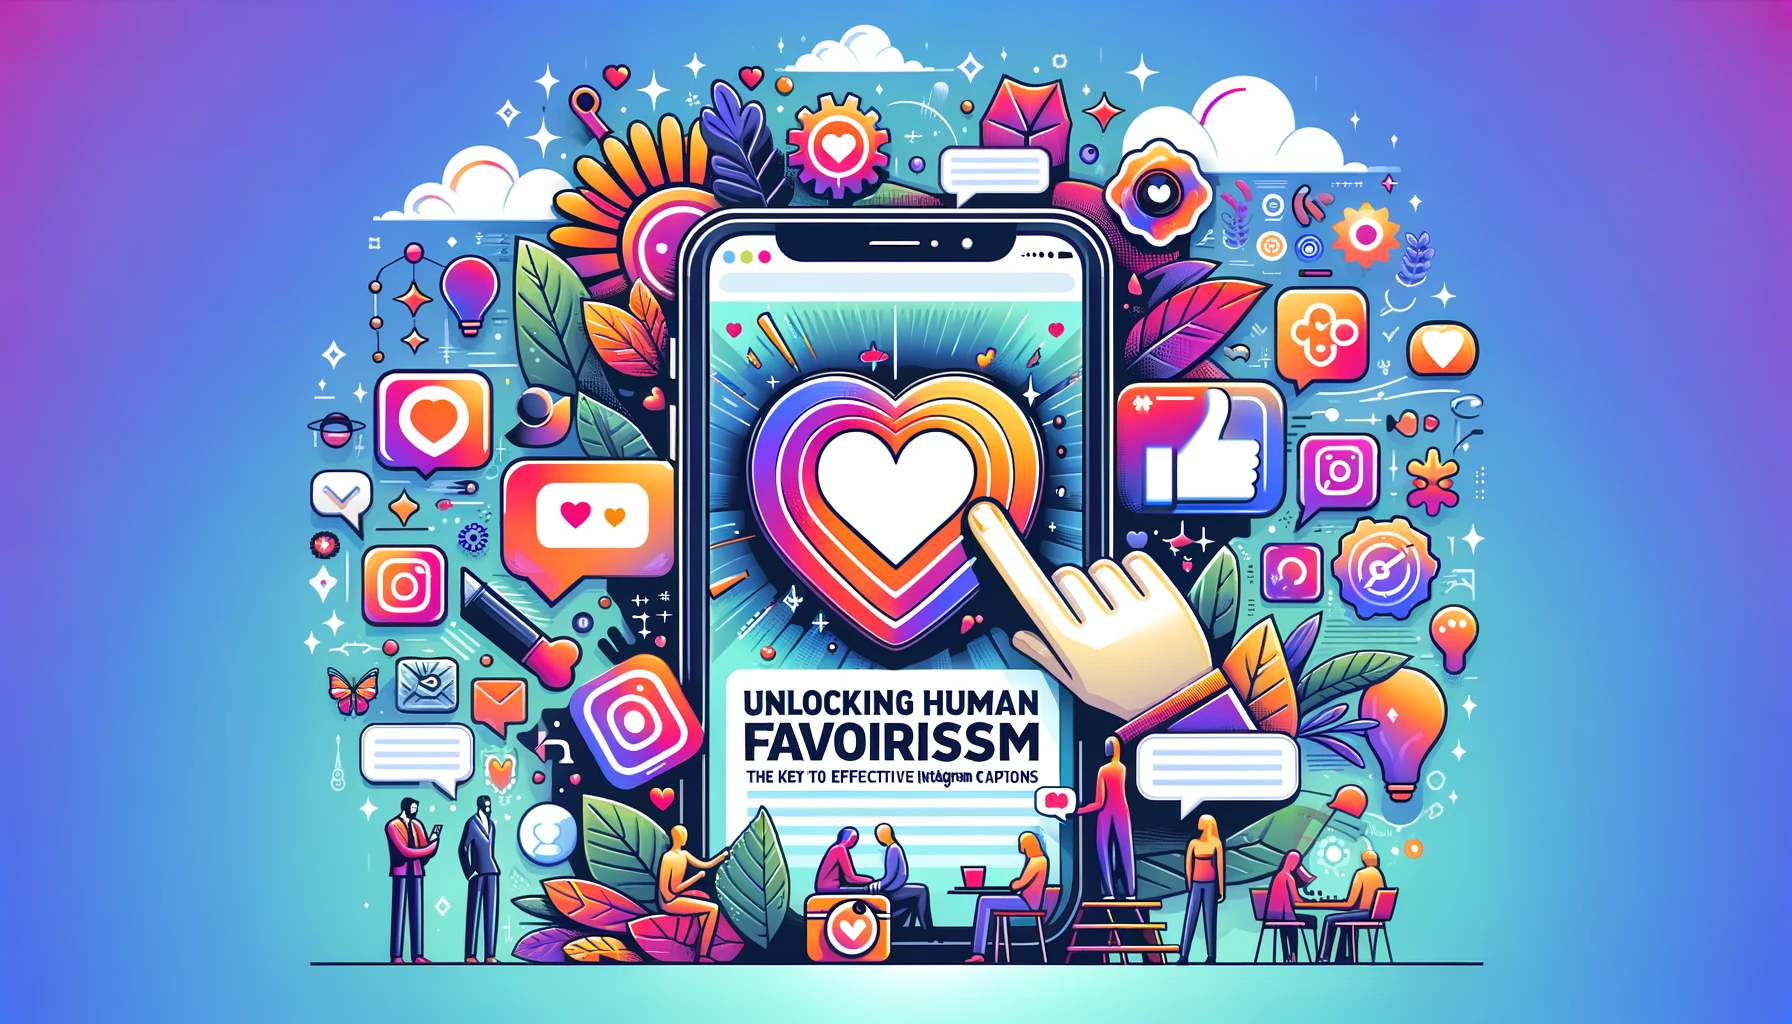 Unlocking Human Favoritism: The Key to Effective Instagram Captions